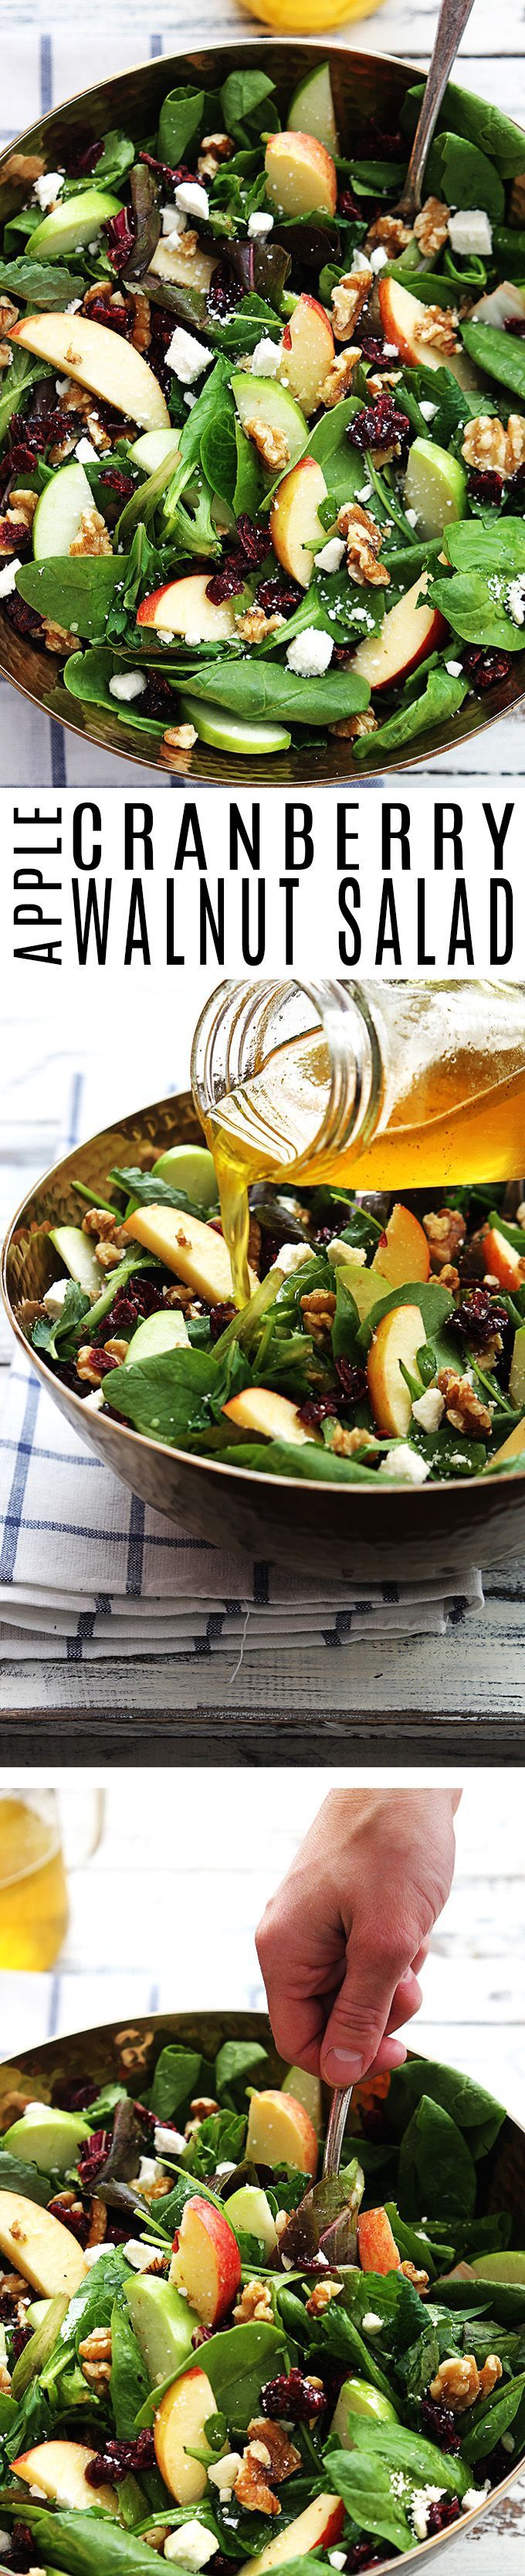 Crisp apples, dried cranberries, feta cheese, and hearty walnuts come together in a fresh Autumn salad.